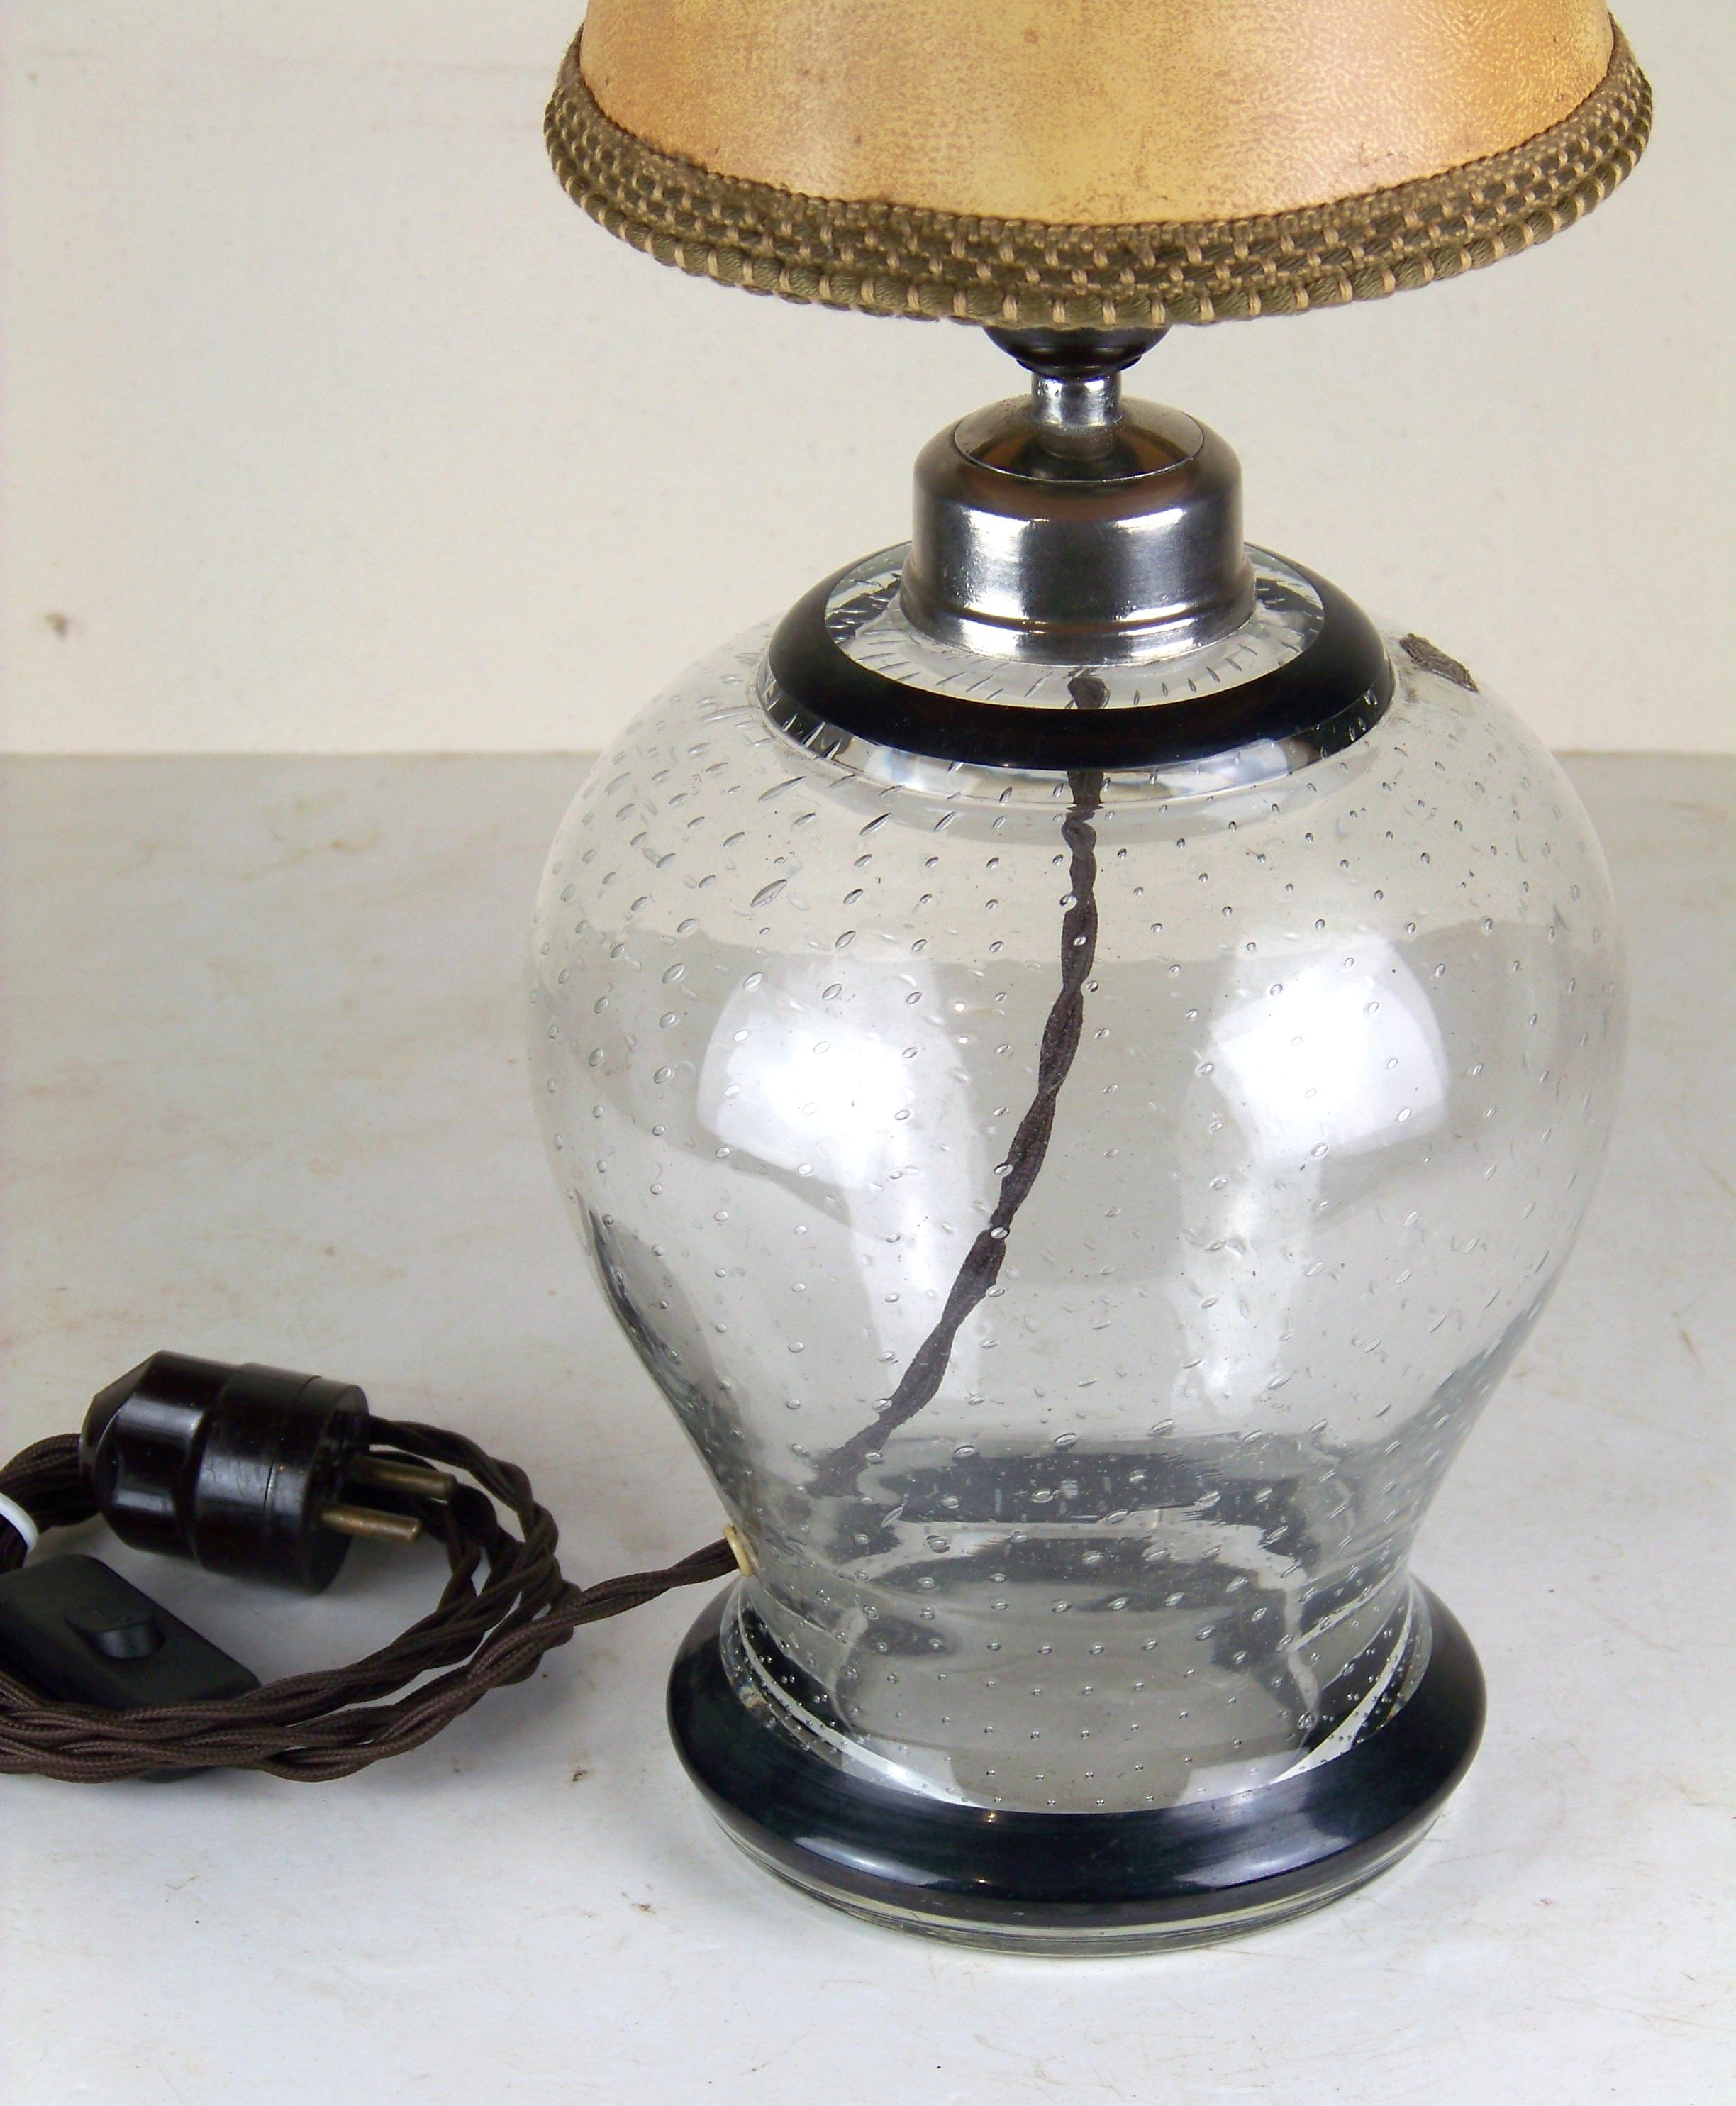 Mid-Century Modern Table Glass Lamp - A.Sch. Sudetenland, 1938-1945 For Sale